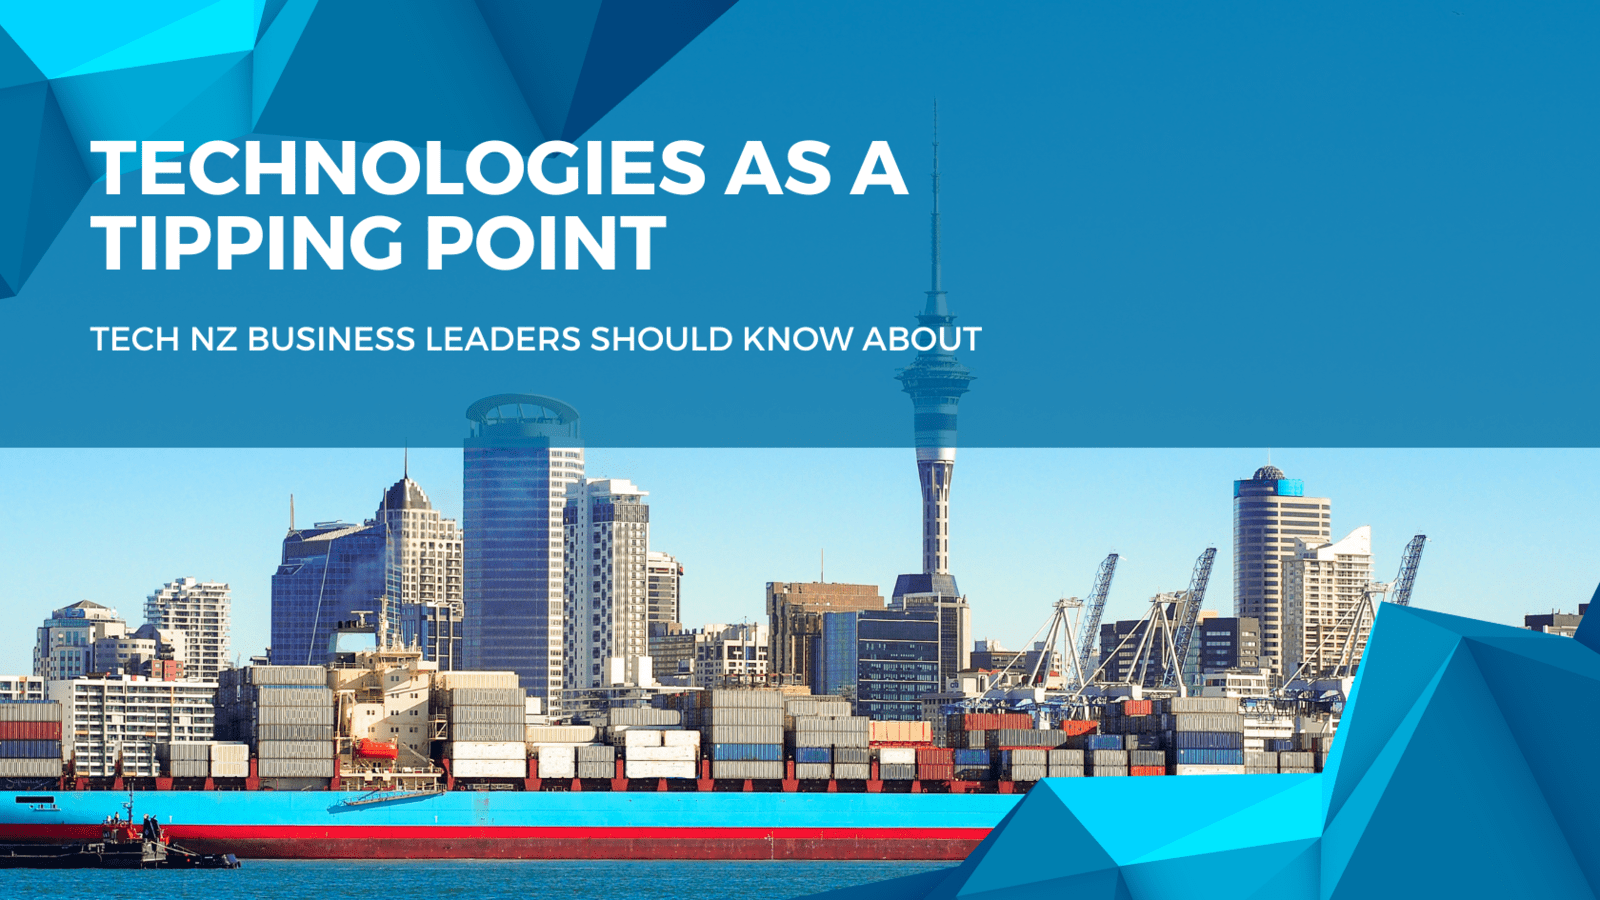 technologies as a tipping point - tech nz business leaders should know about